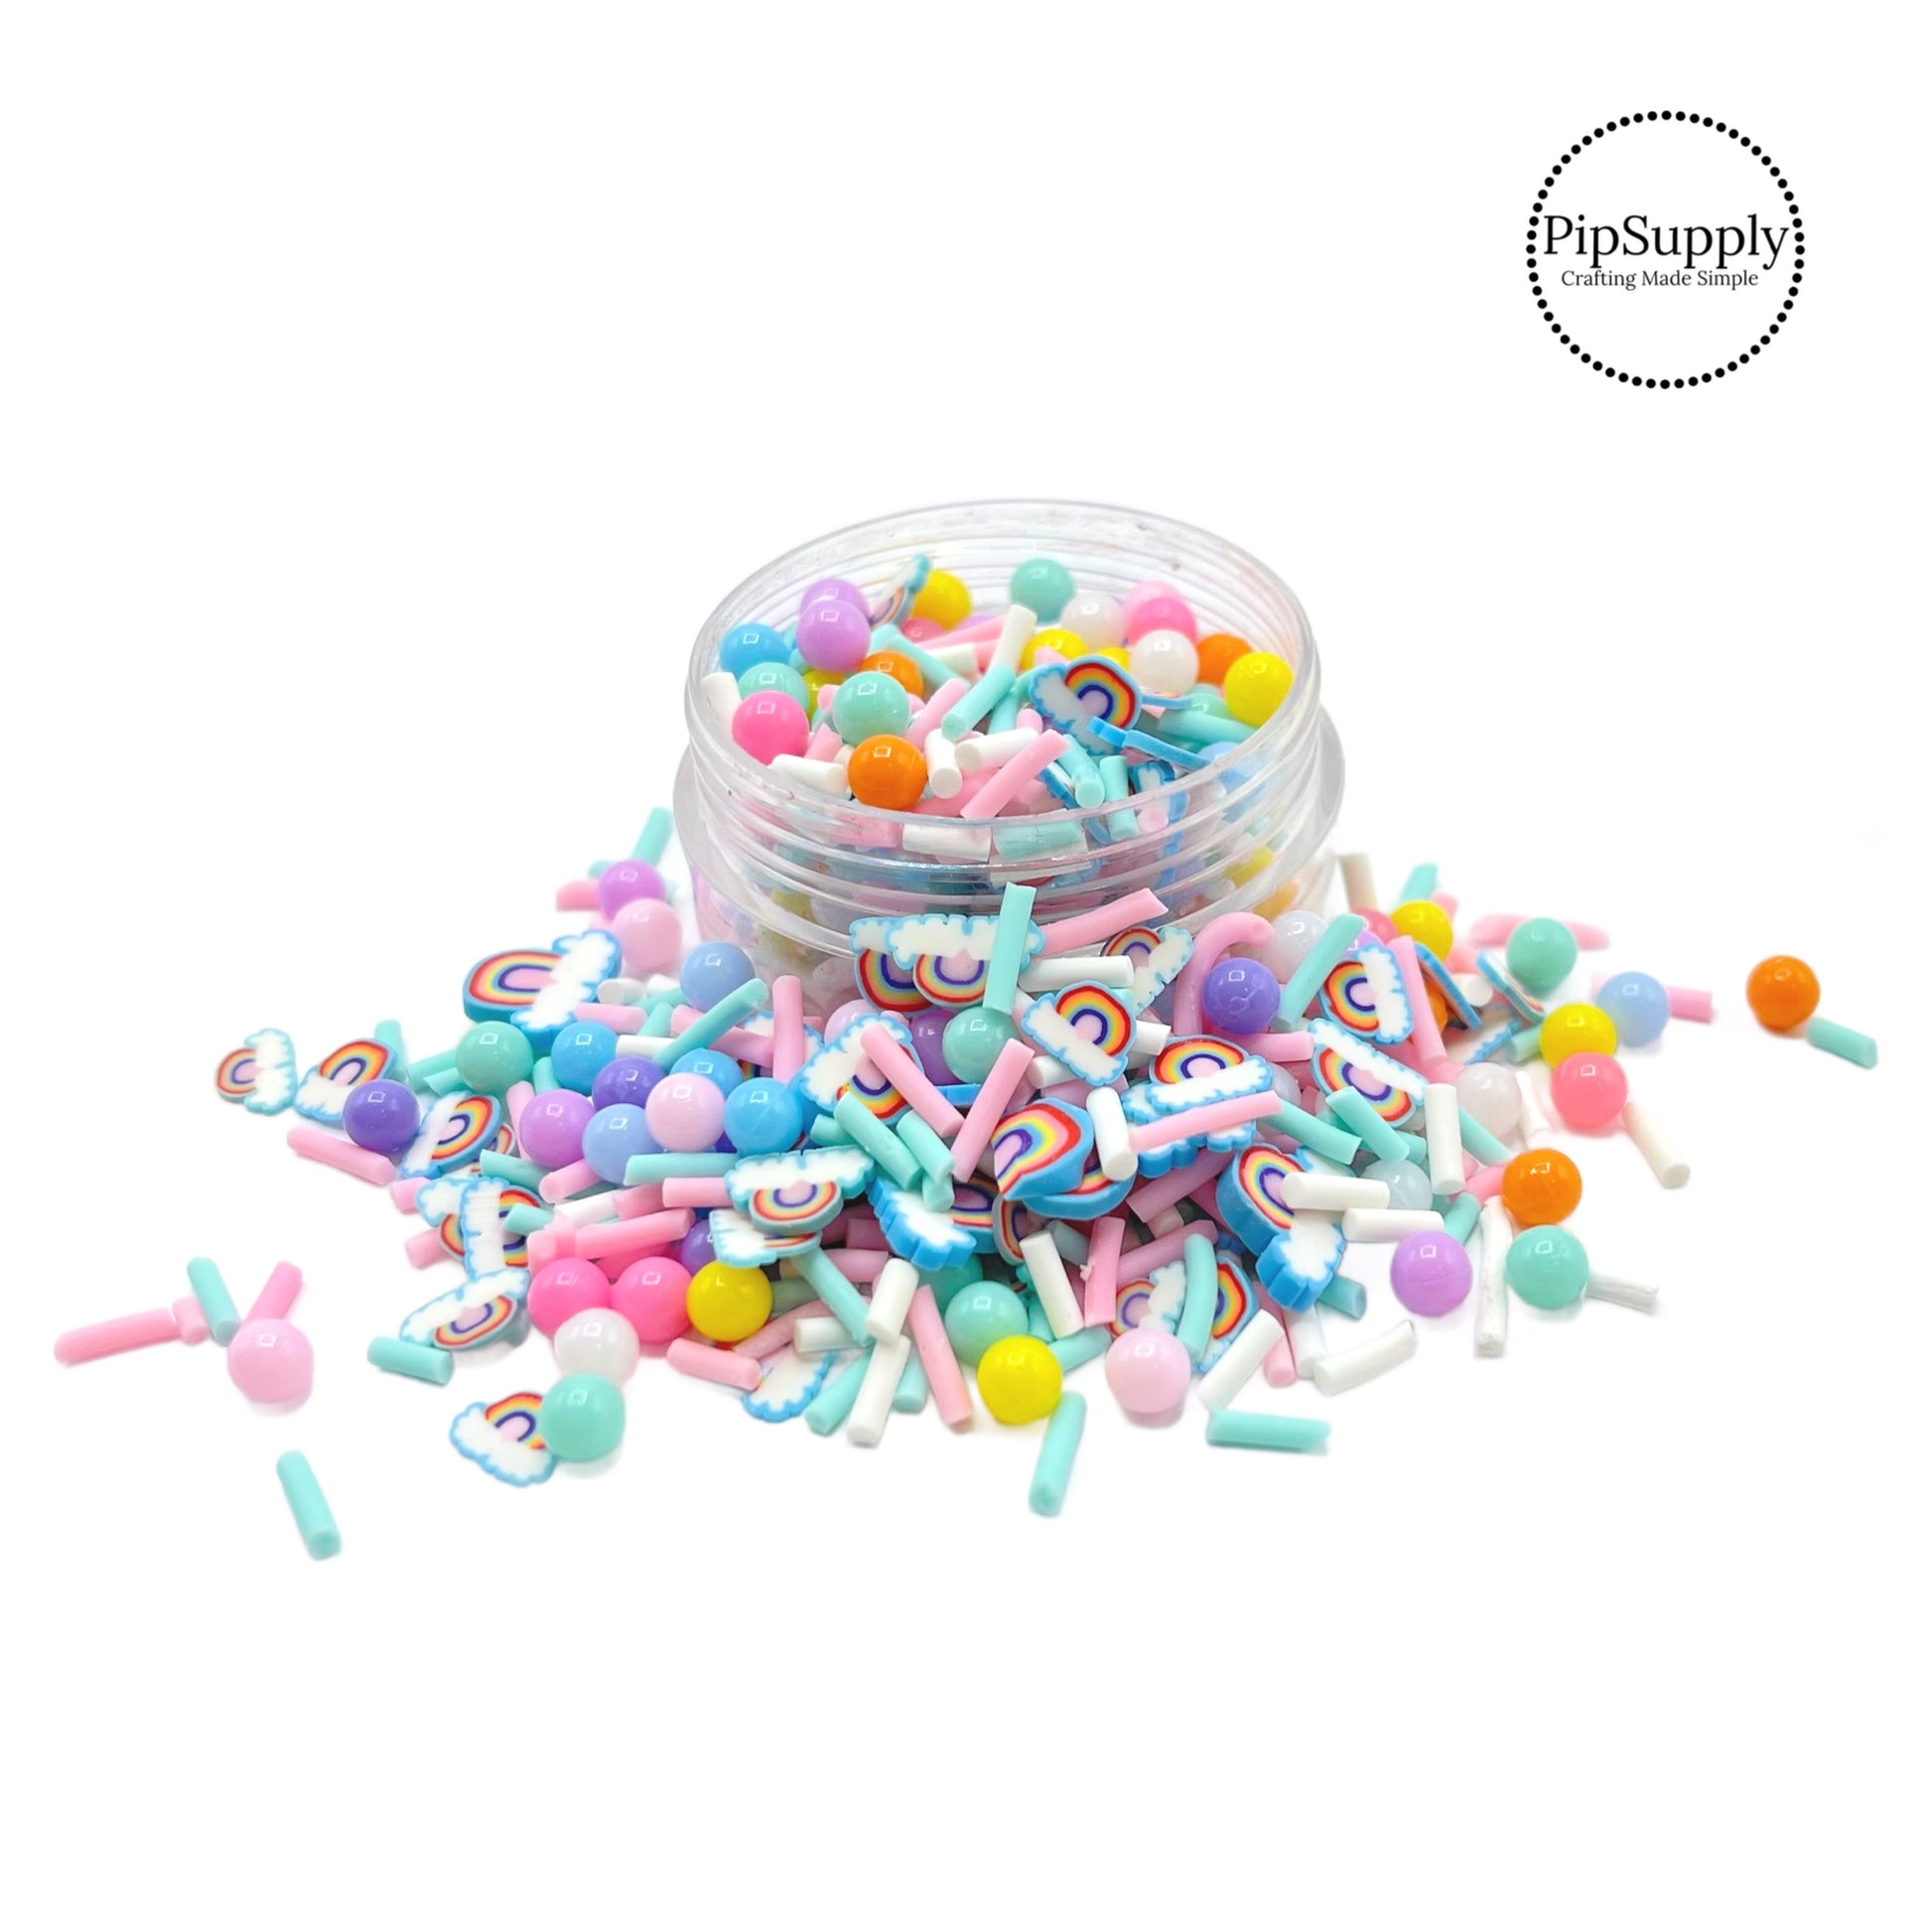 This pastel multi colored clay slices mix is versatile for many craft projects. This spring mix has beads, sprinkles, clay slices of rainbows and clouds. You can use it to add sparkle and decoration to resin projects, filling for shaker bows, slime making, party decor, scrapbooking, card making and nail art. 